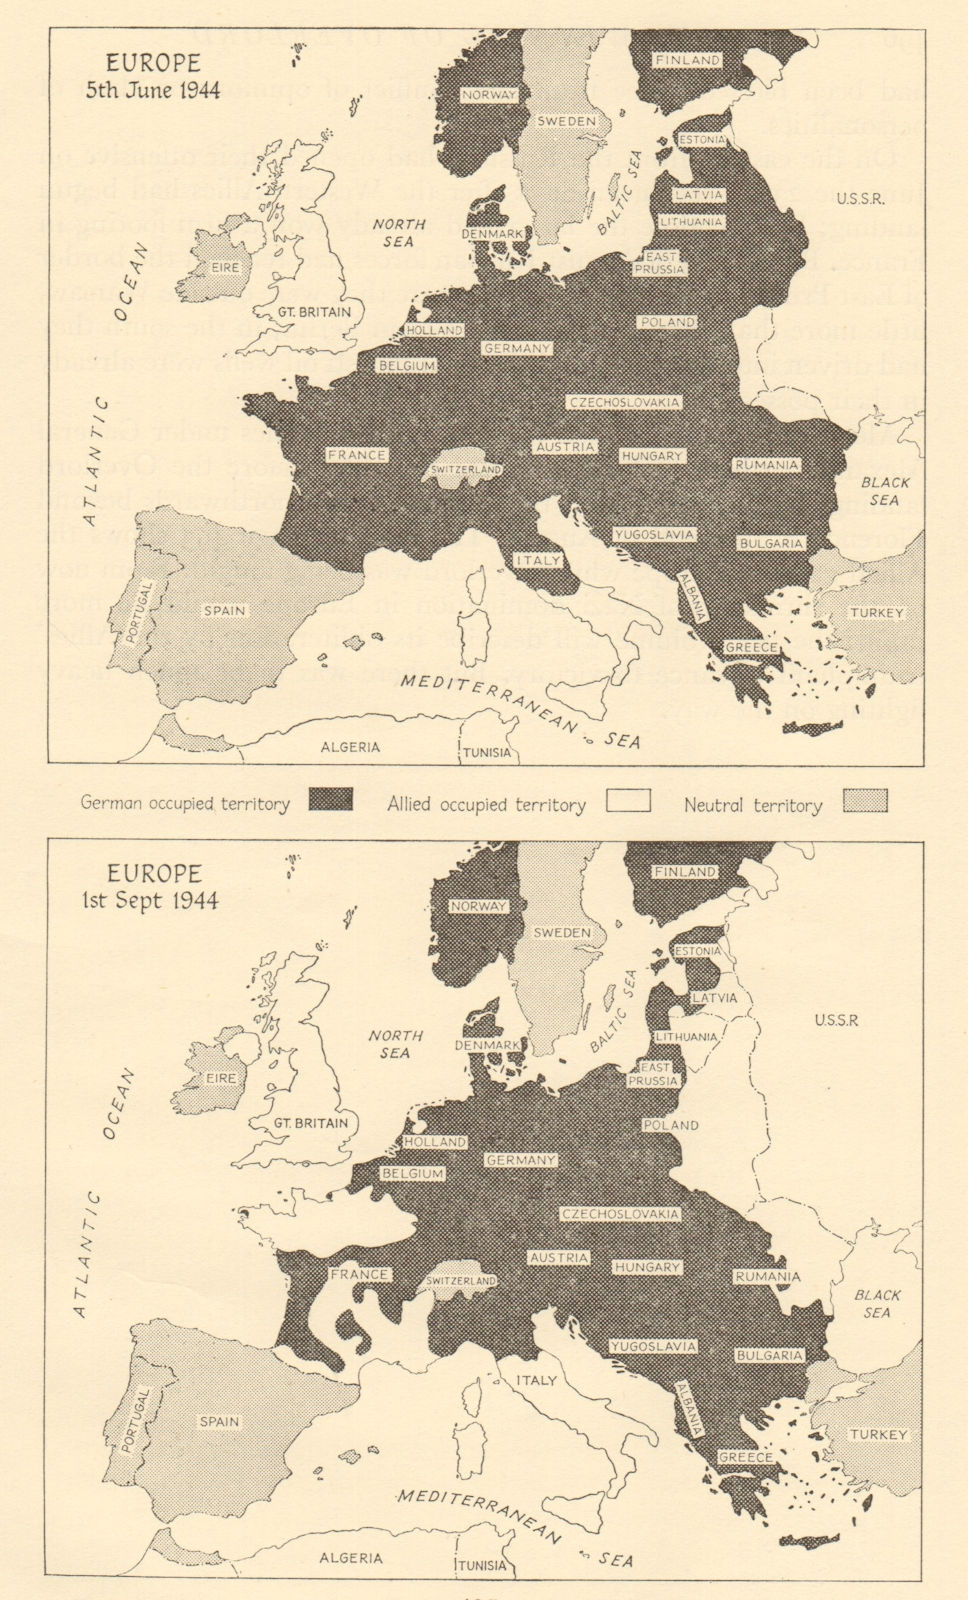 World War Two Allied gains Europe June-Sept 1944 Western/Eastern Fronts 1962 map